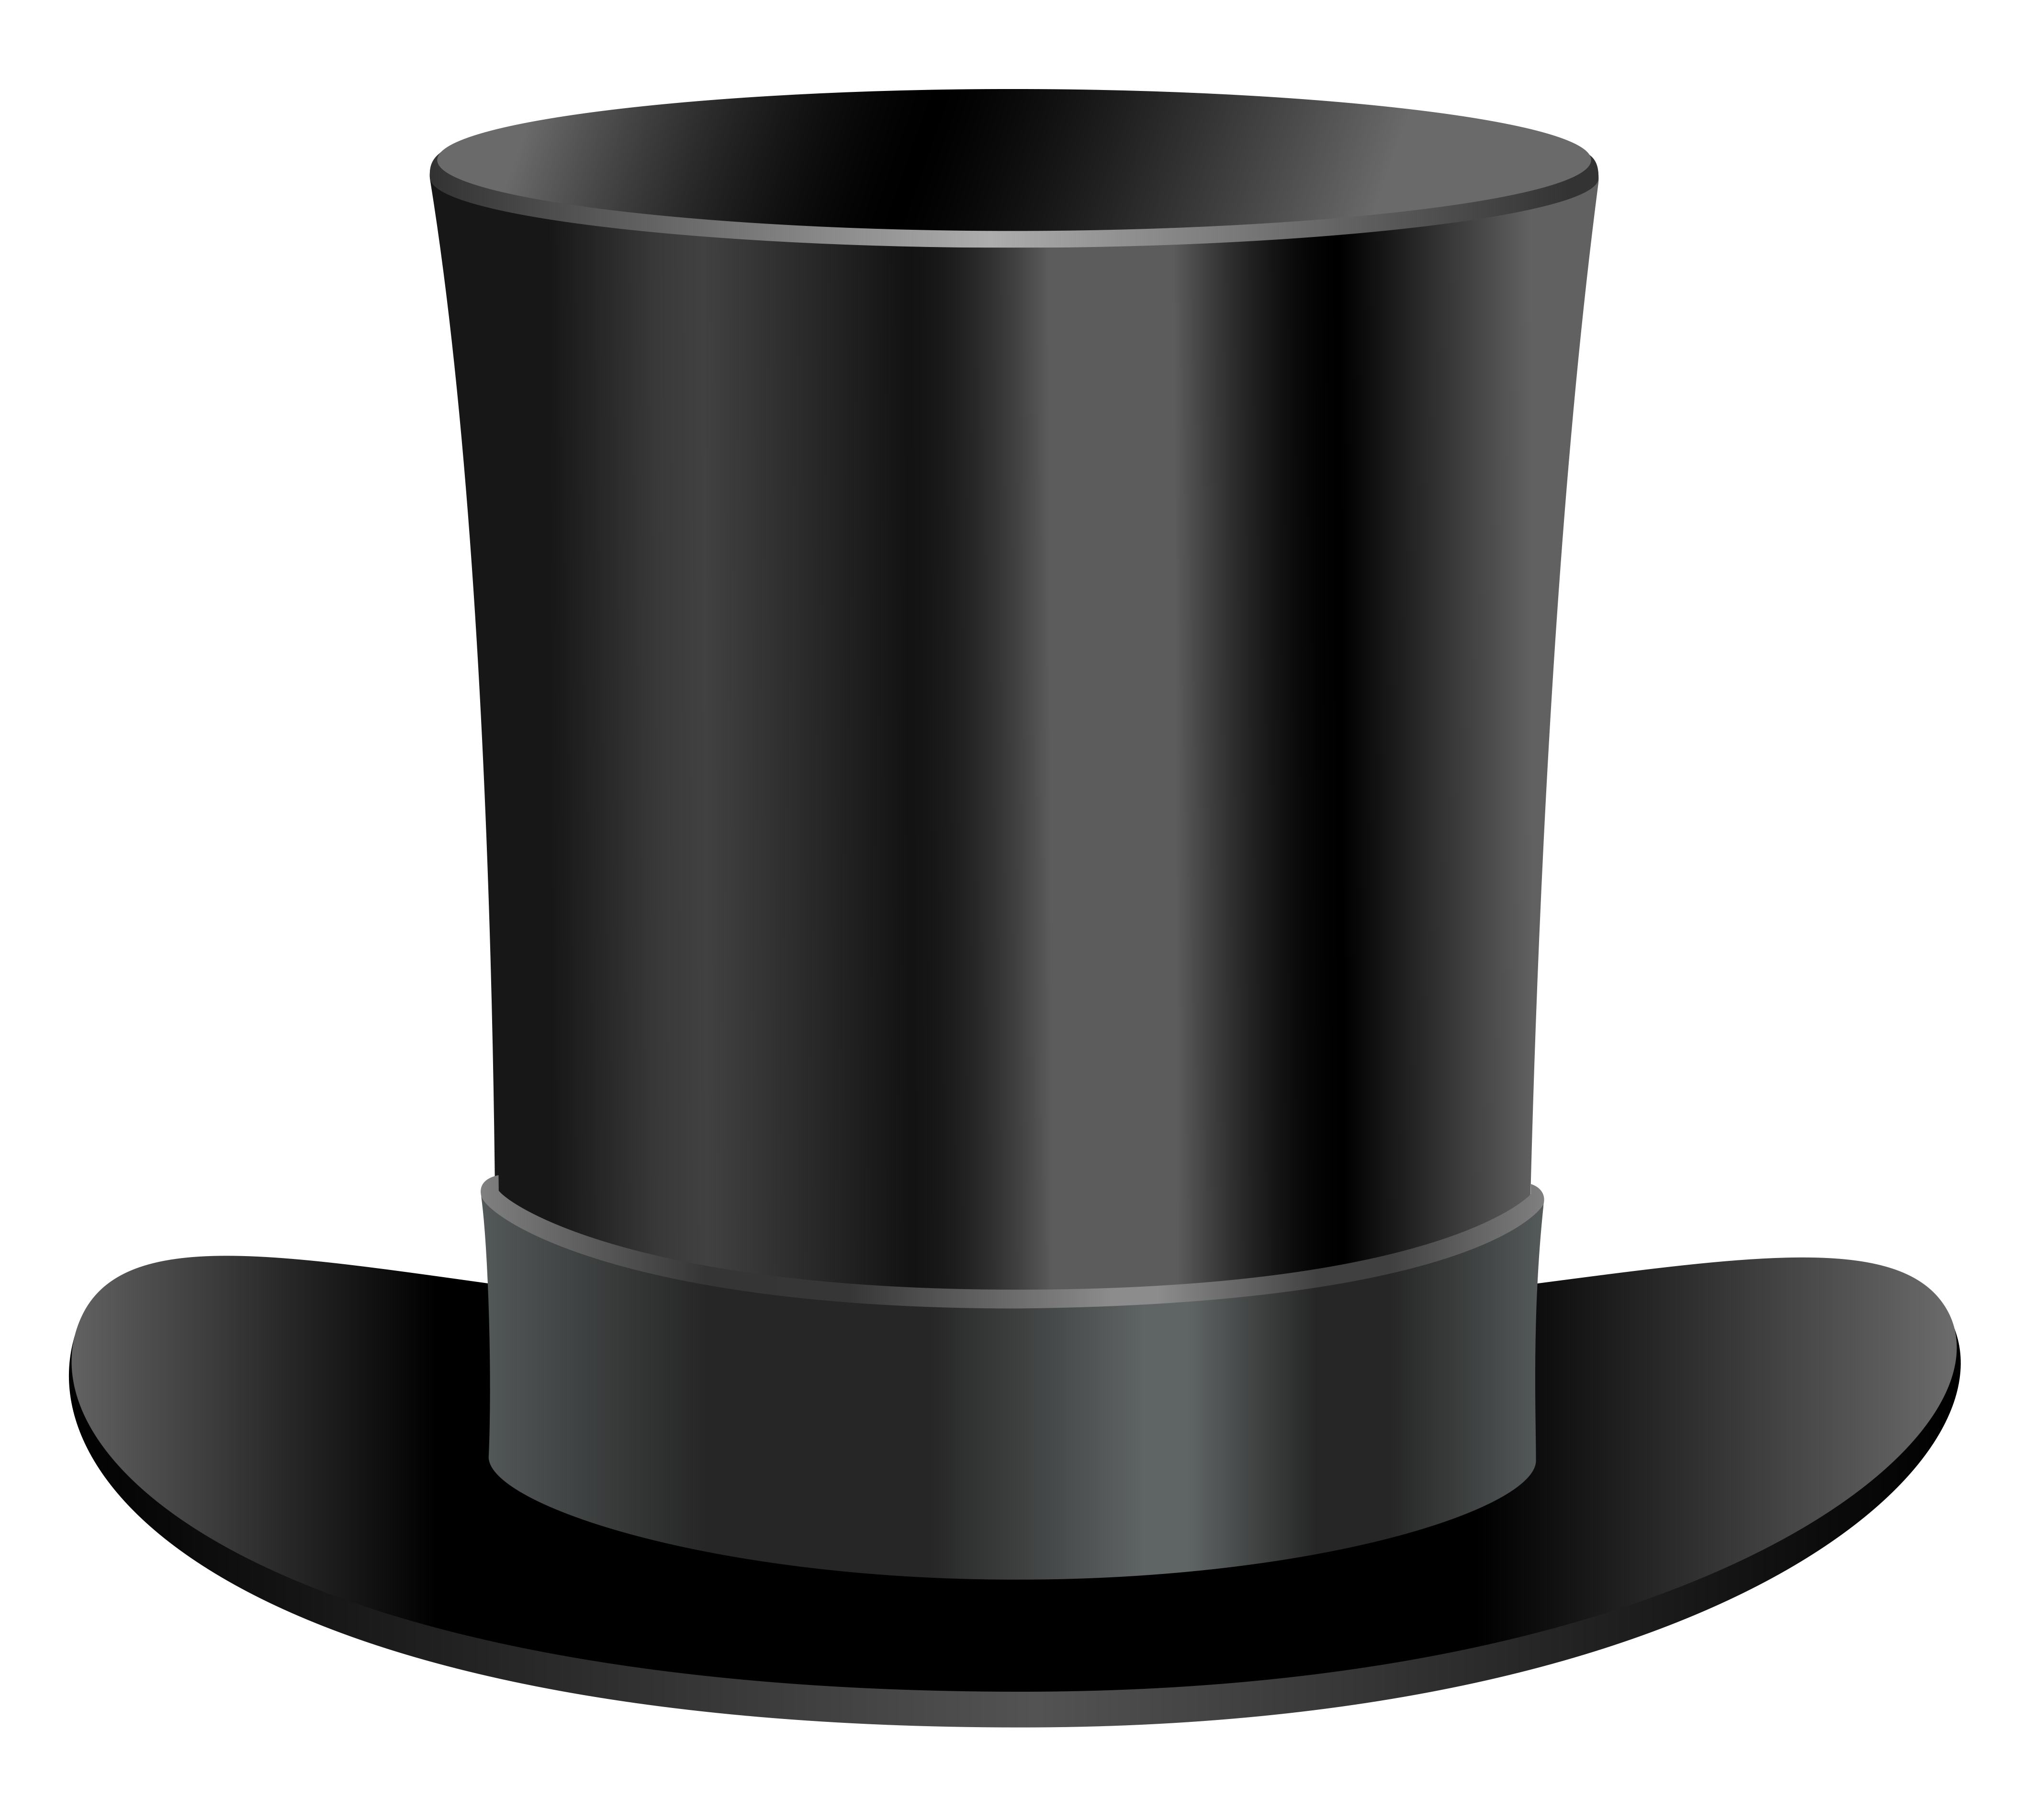 Abraham lincoln hat clipart